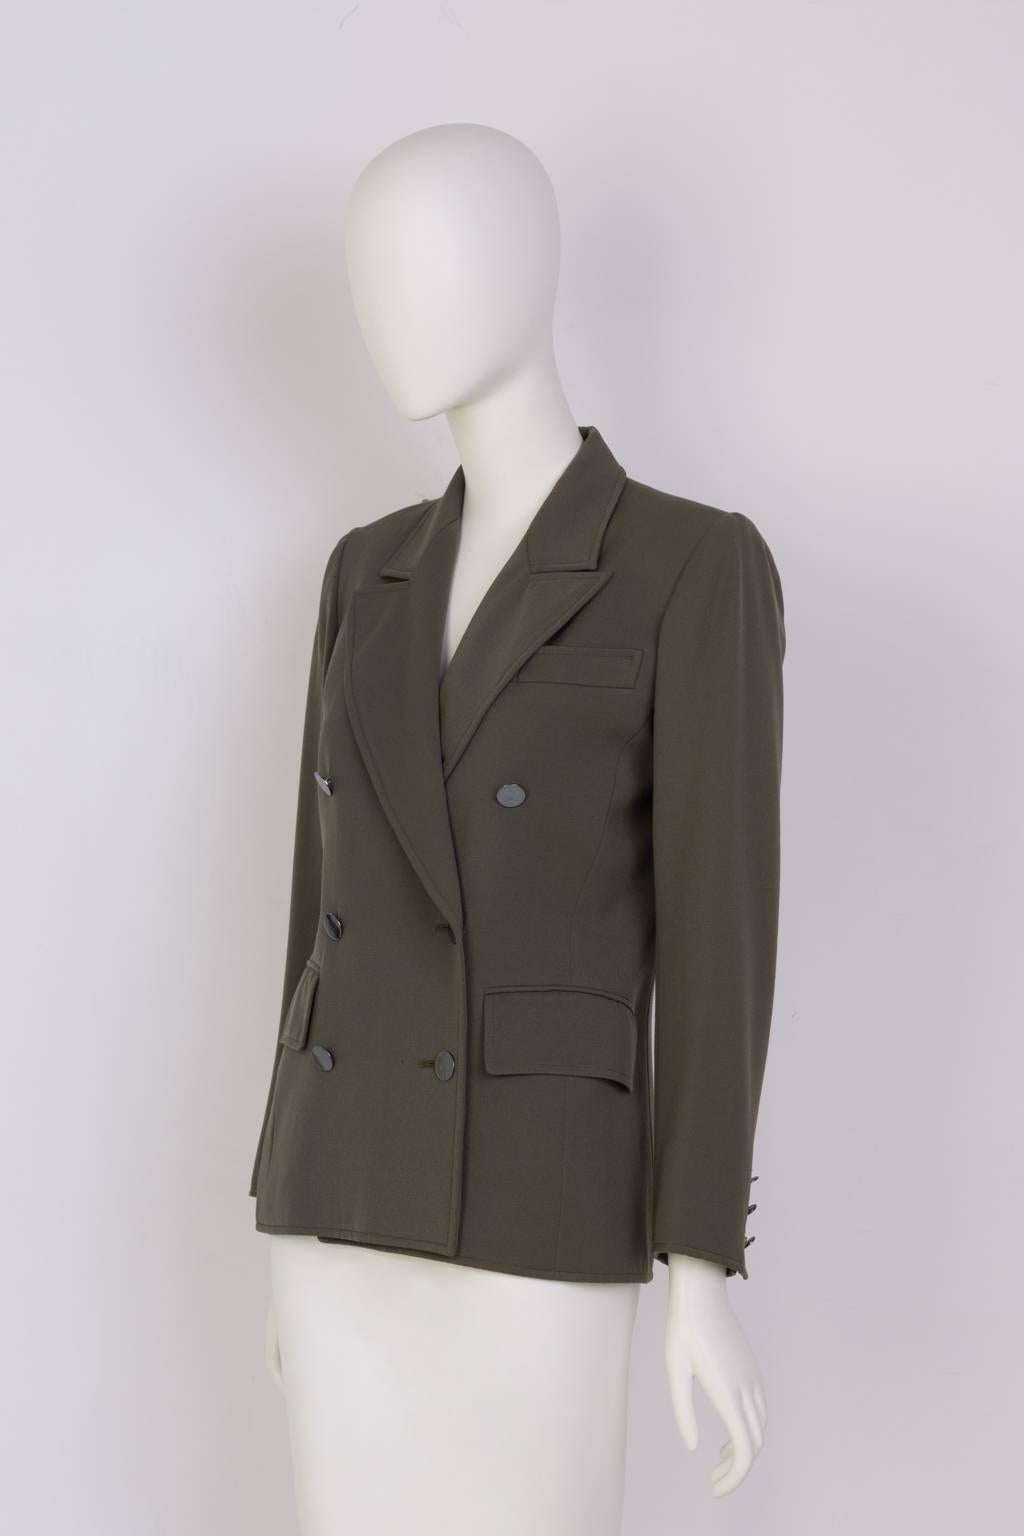 Double breasted jacket in olive wool twill. Fully Lined with shoulder pads. 